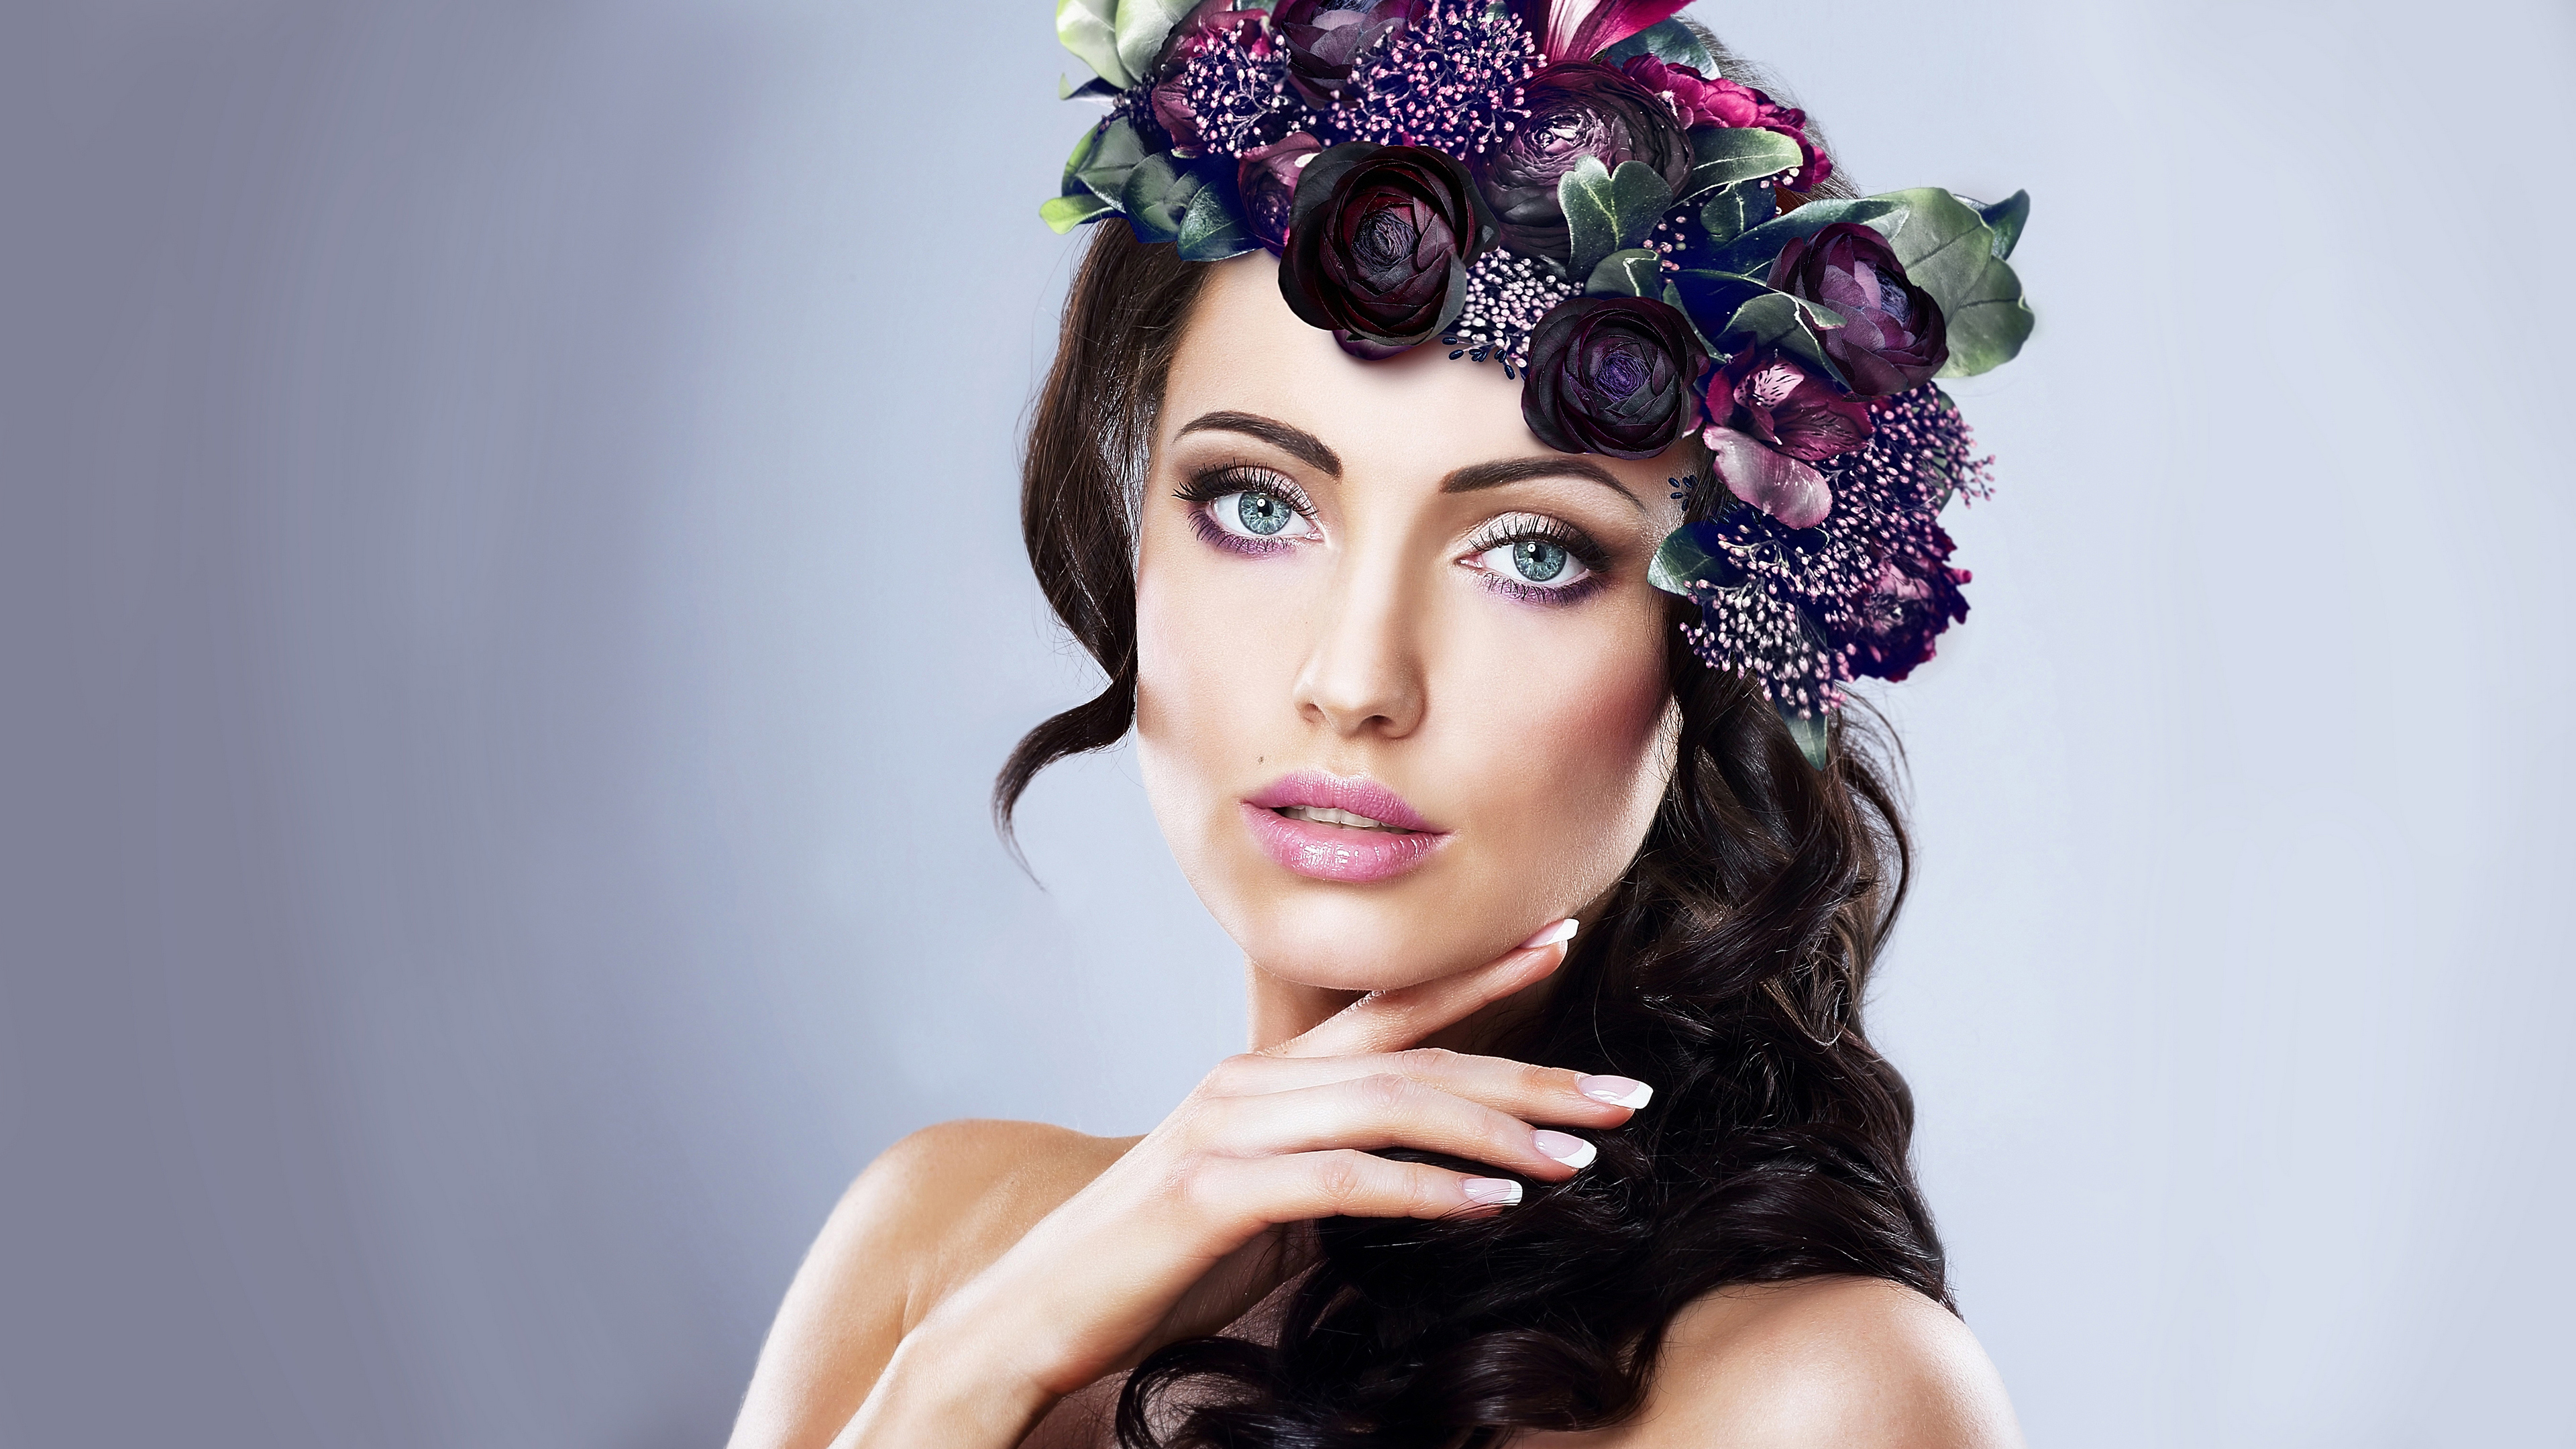 Dark-haired brunette with flowers in her hair